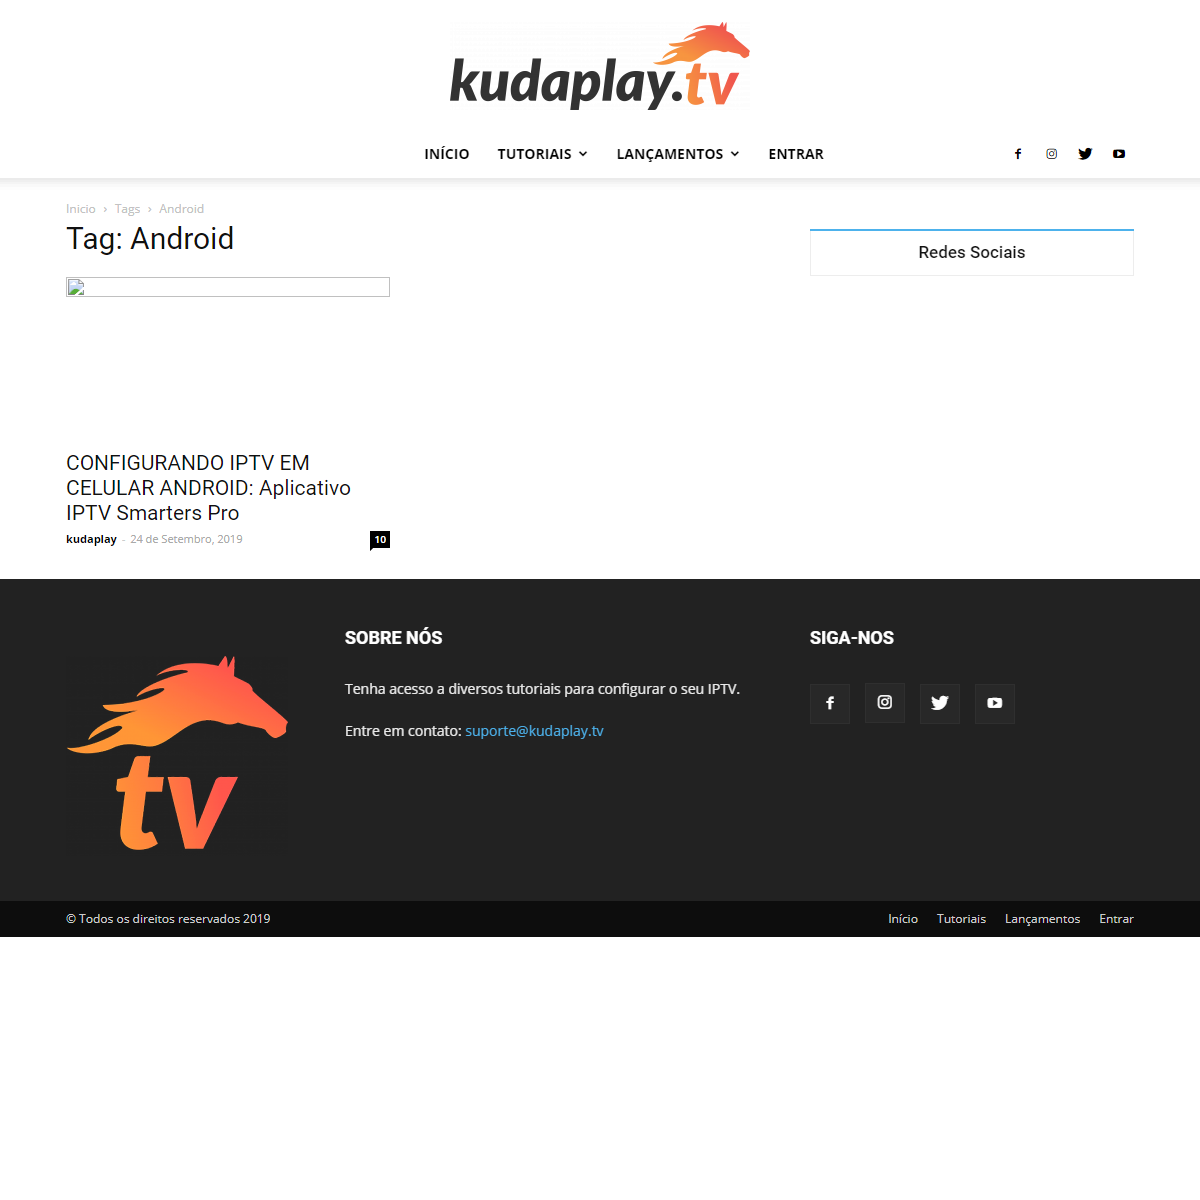 A complete backup of https://kudaplay.tv/blog/tag/android/